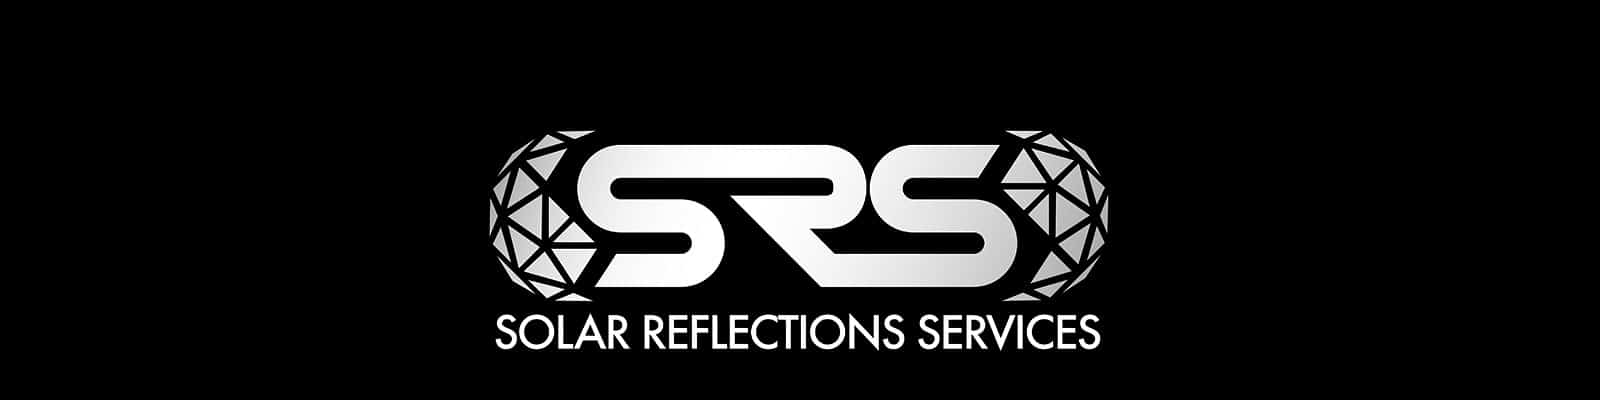 Solar Reflections Services